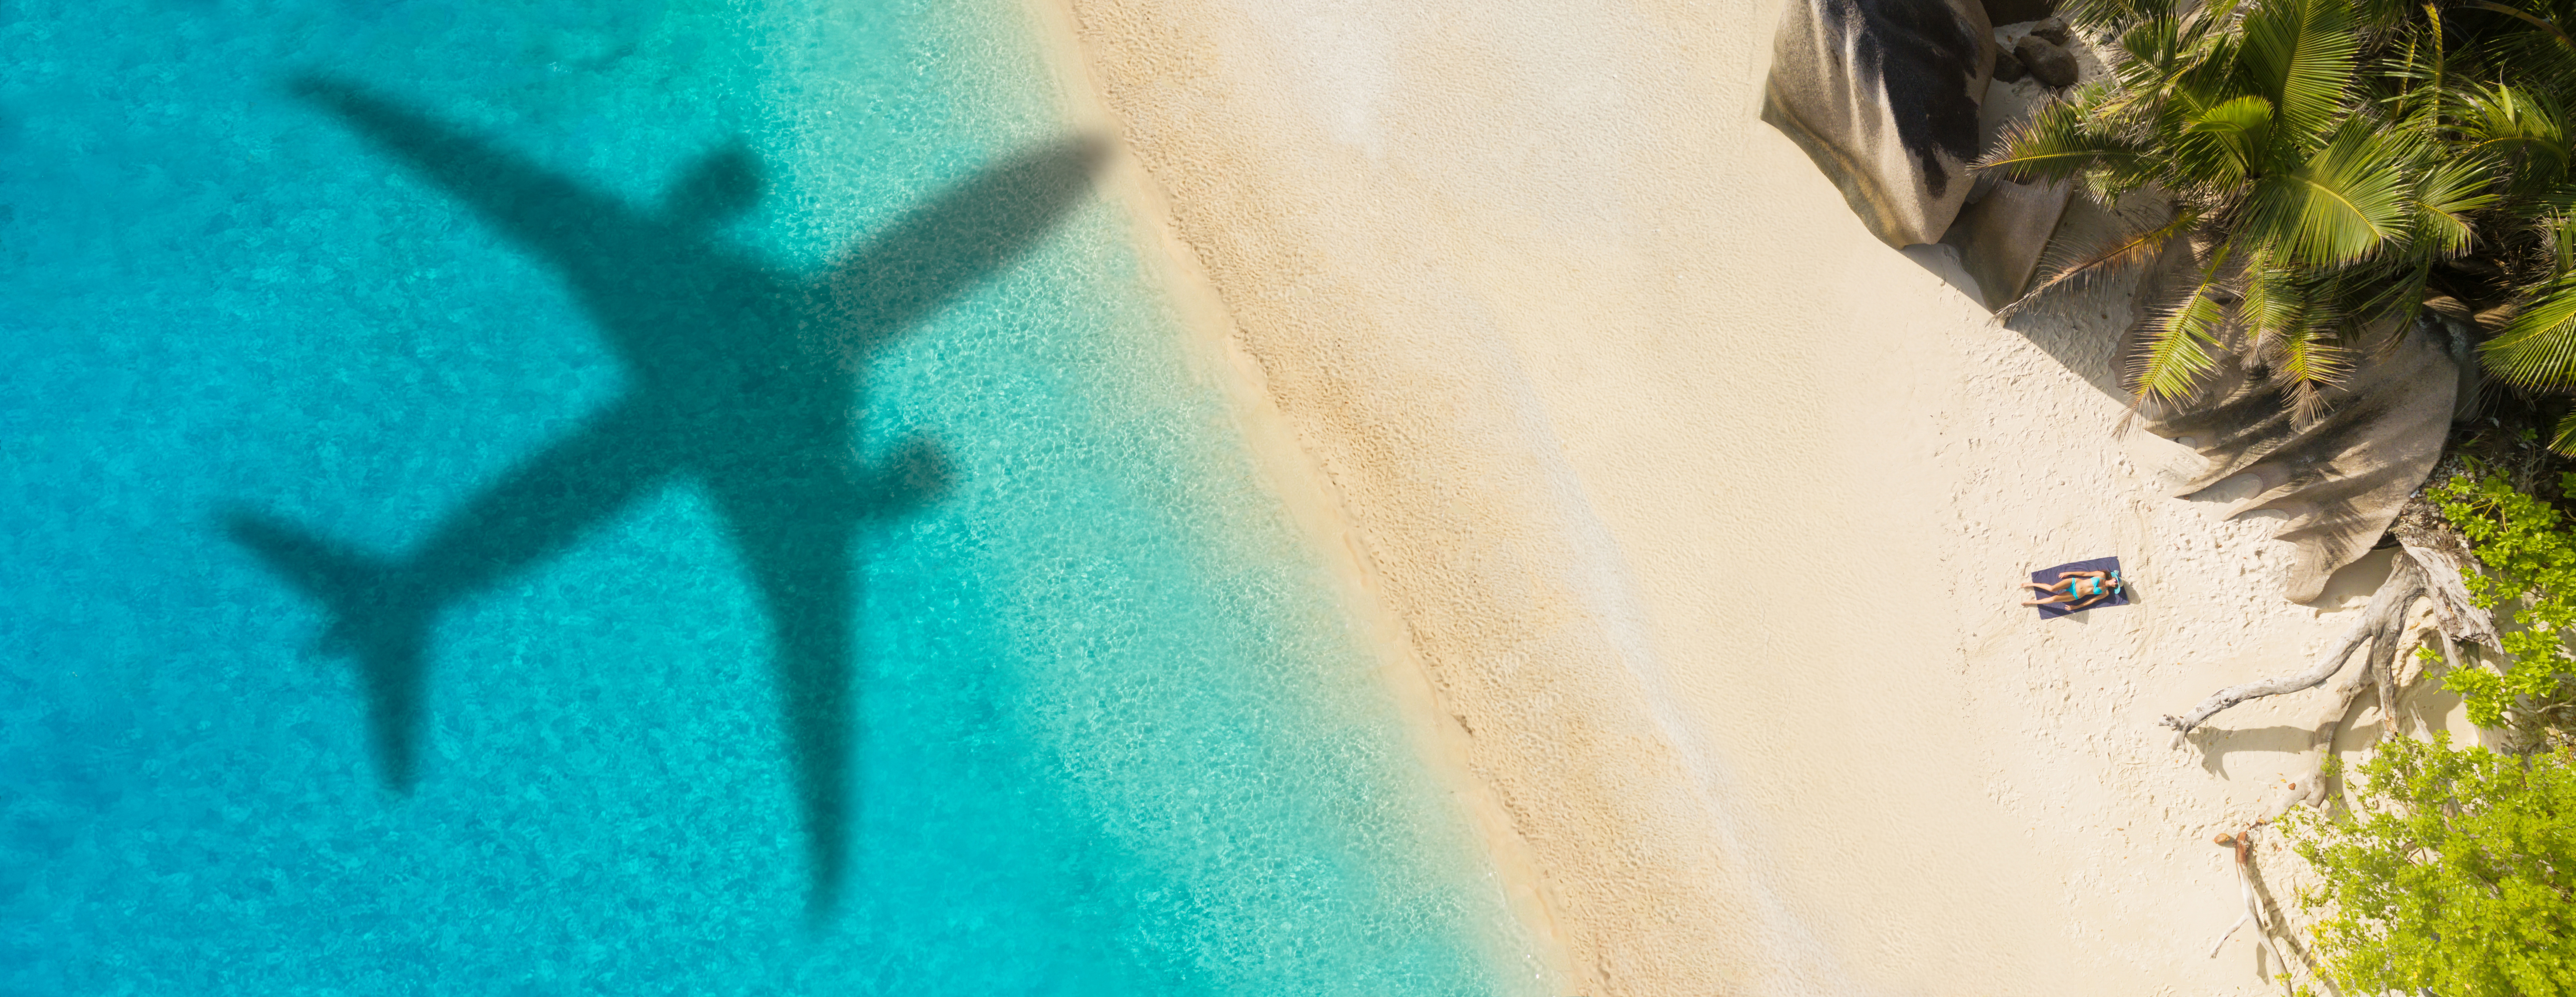 Shadow of plane flying over beach